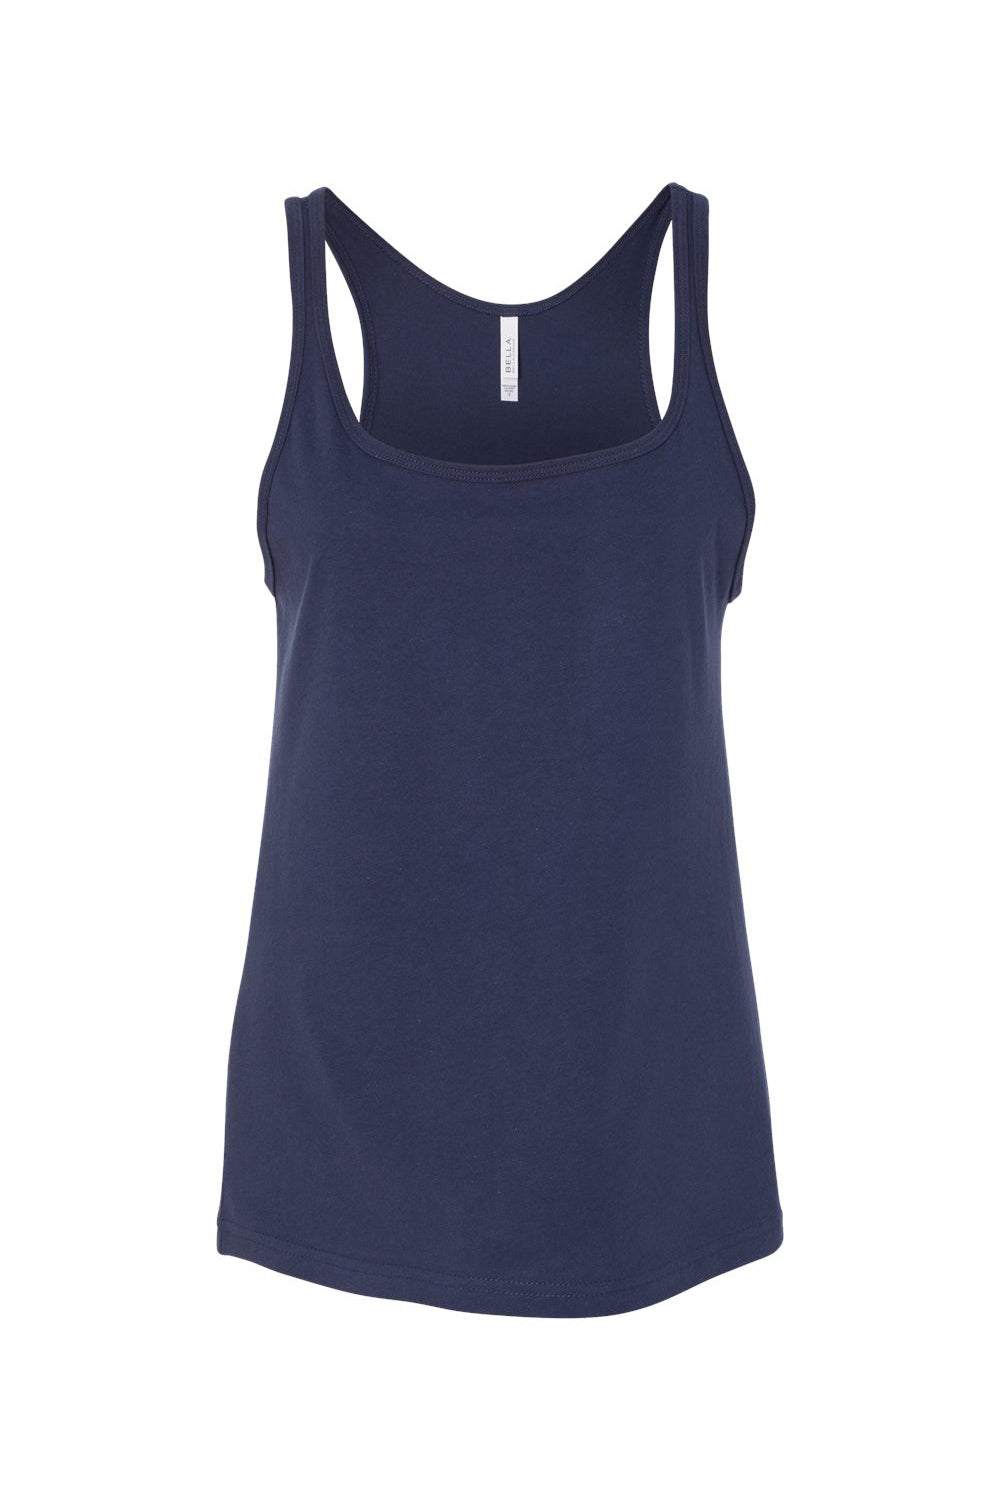 Bella + Canvas 6488 Womens Relaxed Jersey Tank Top Navy Blue Flat Front